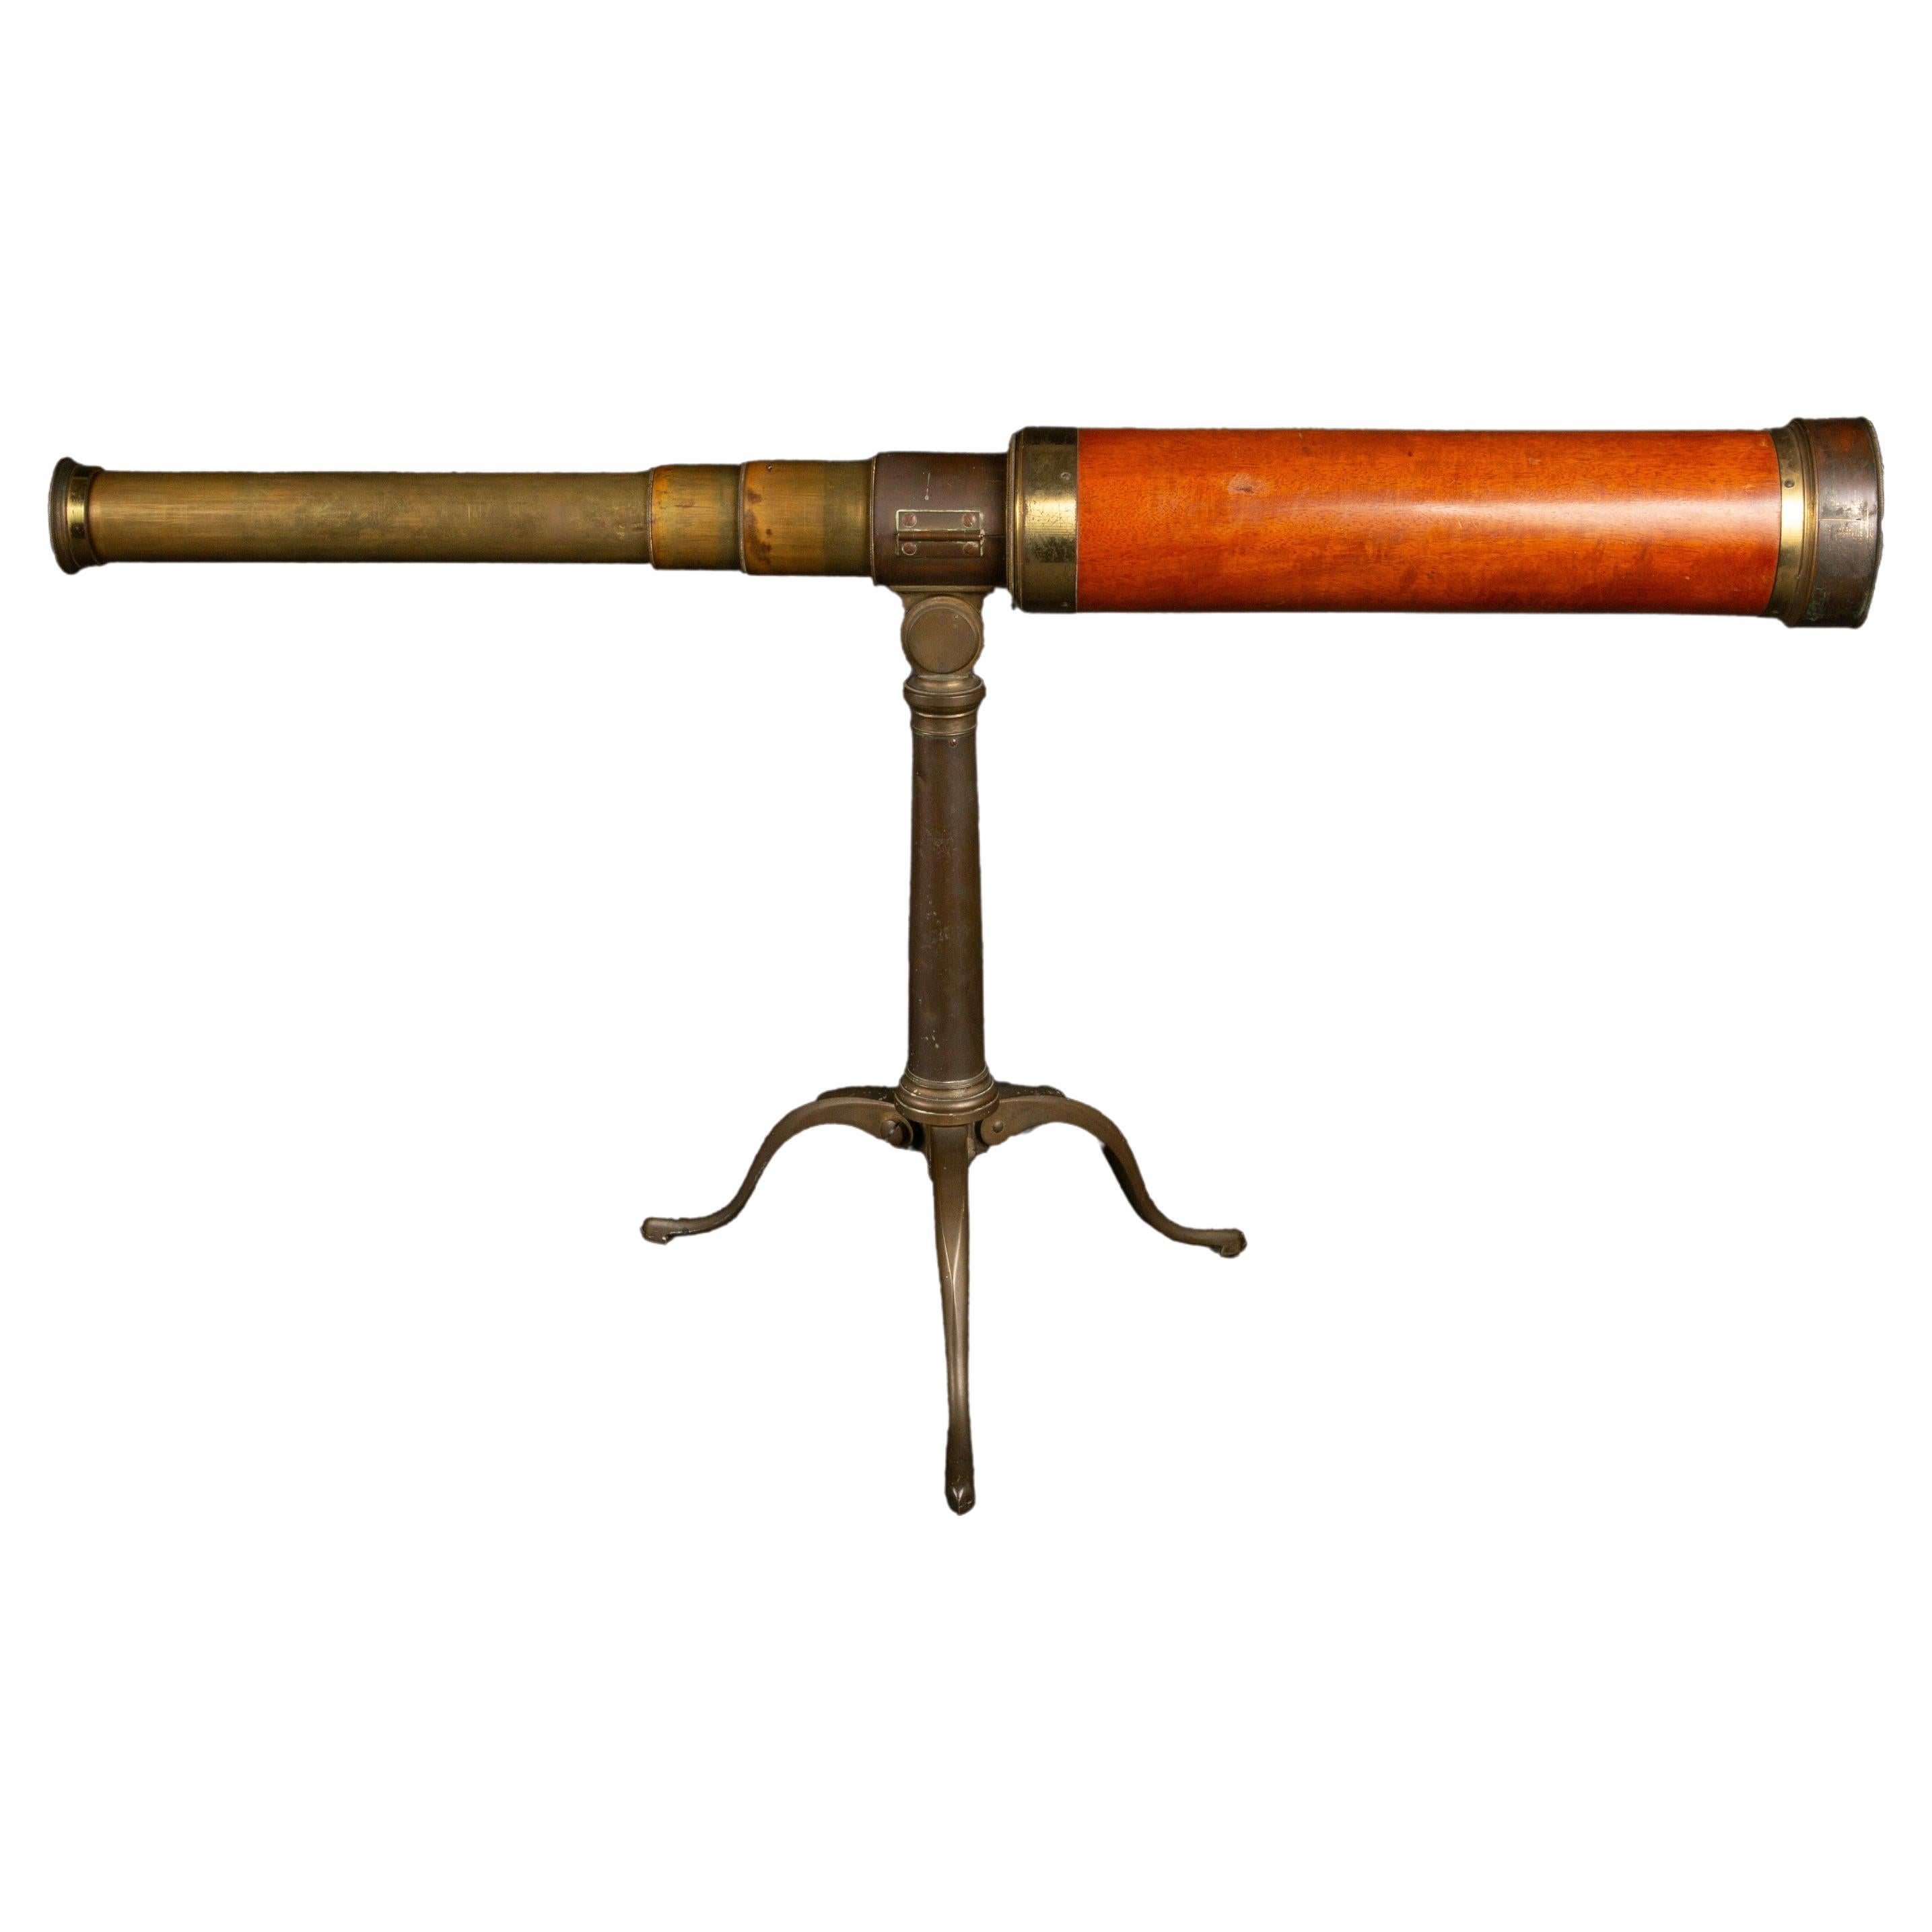 19th Century English Telescope with Wooden Barrel